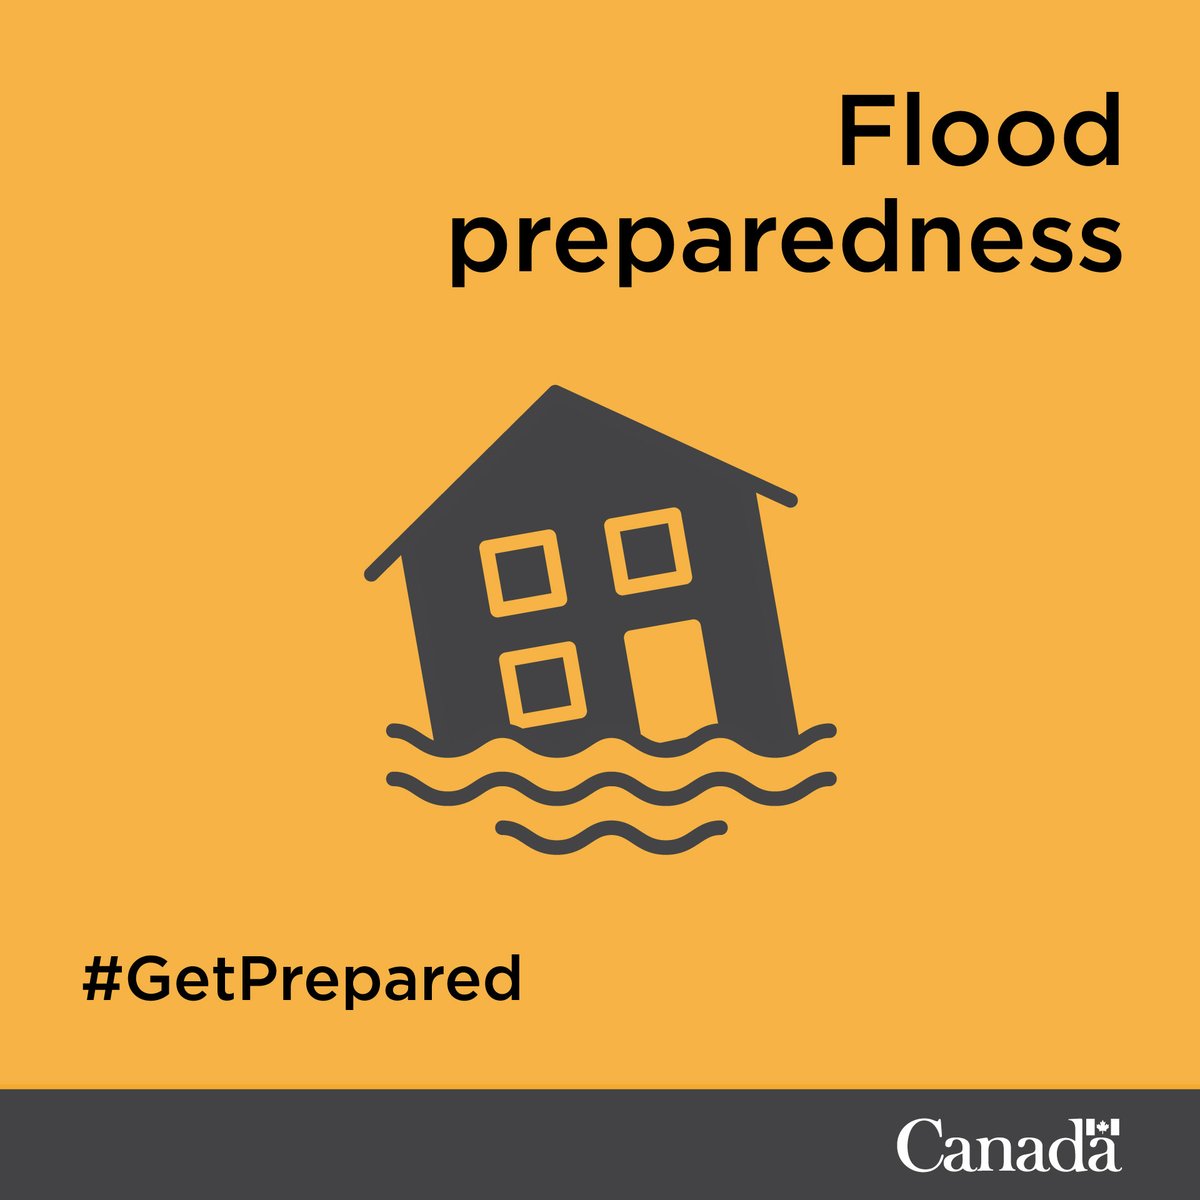 Is there a #flood warning for your community? Make sure to: •Shut off electricity to areas at risk of flooding •Move furniture and electronics to a place least likely to be affected by water •Have your #EmergencyKit ready in an accessible place More: getprepared.gc.ca/cnt/hzd/flds-d…